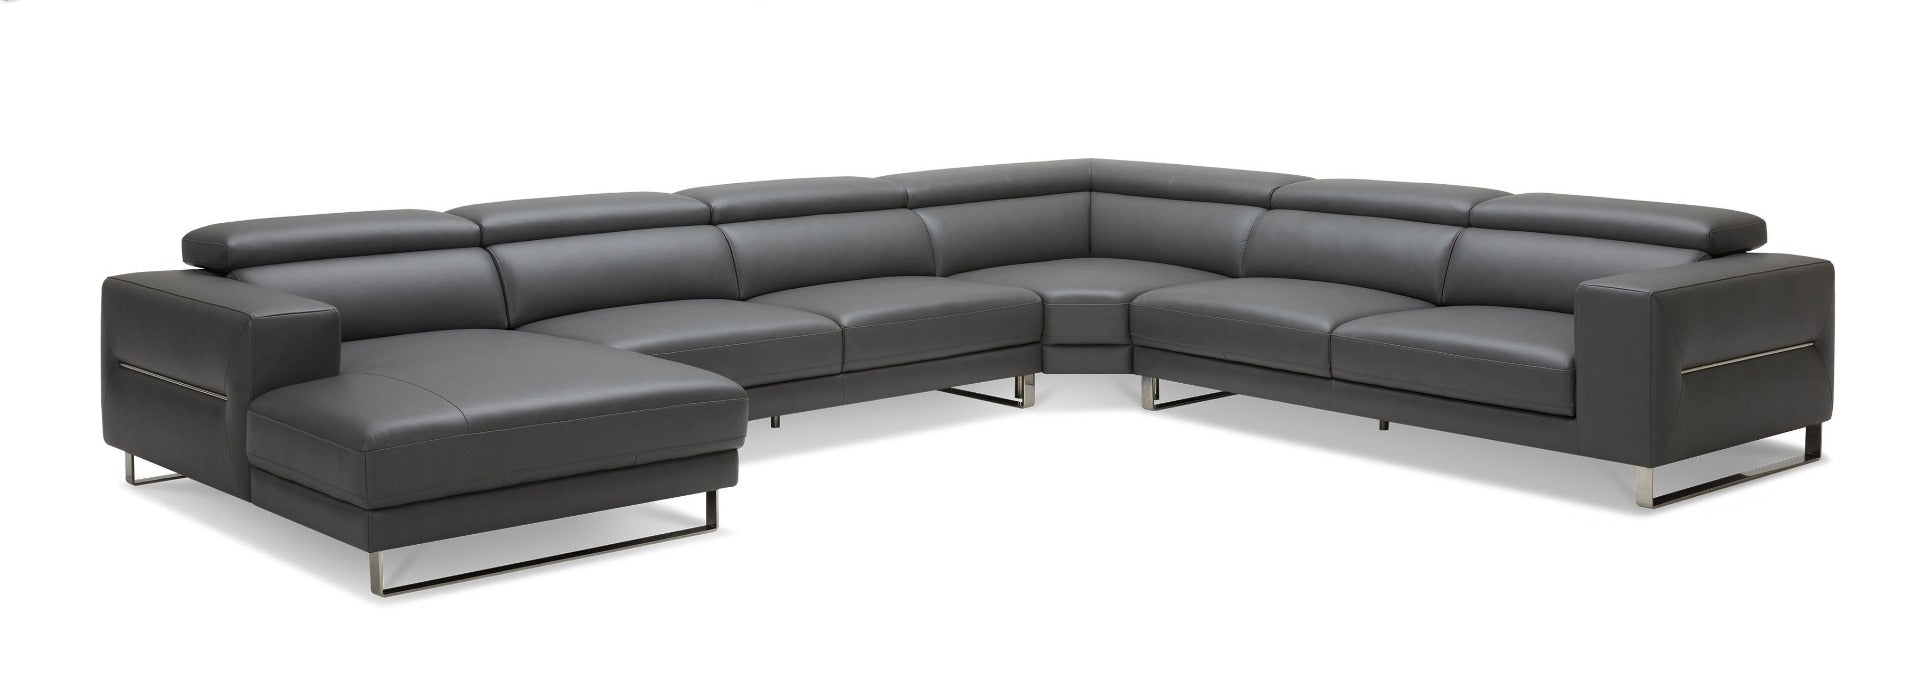 Divani Casa Hawkey - Contemporary Leather LAF Chaise Sectional Sofa-Sectional Sofa-VIG-Wall2Wall Furnishings